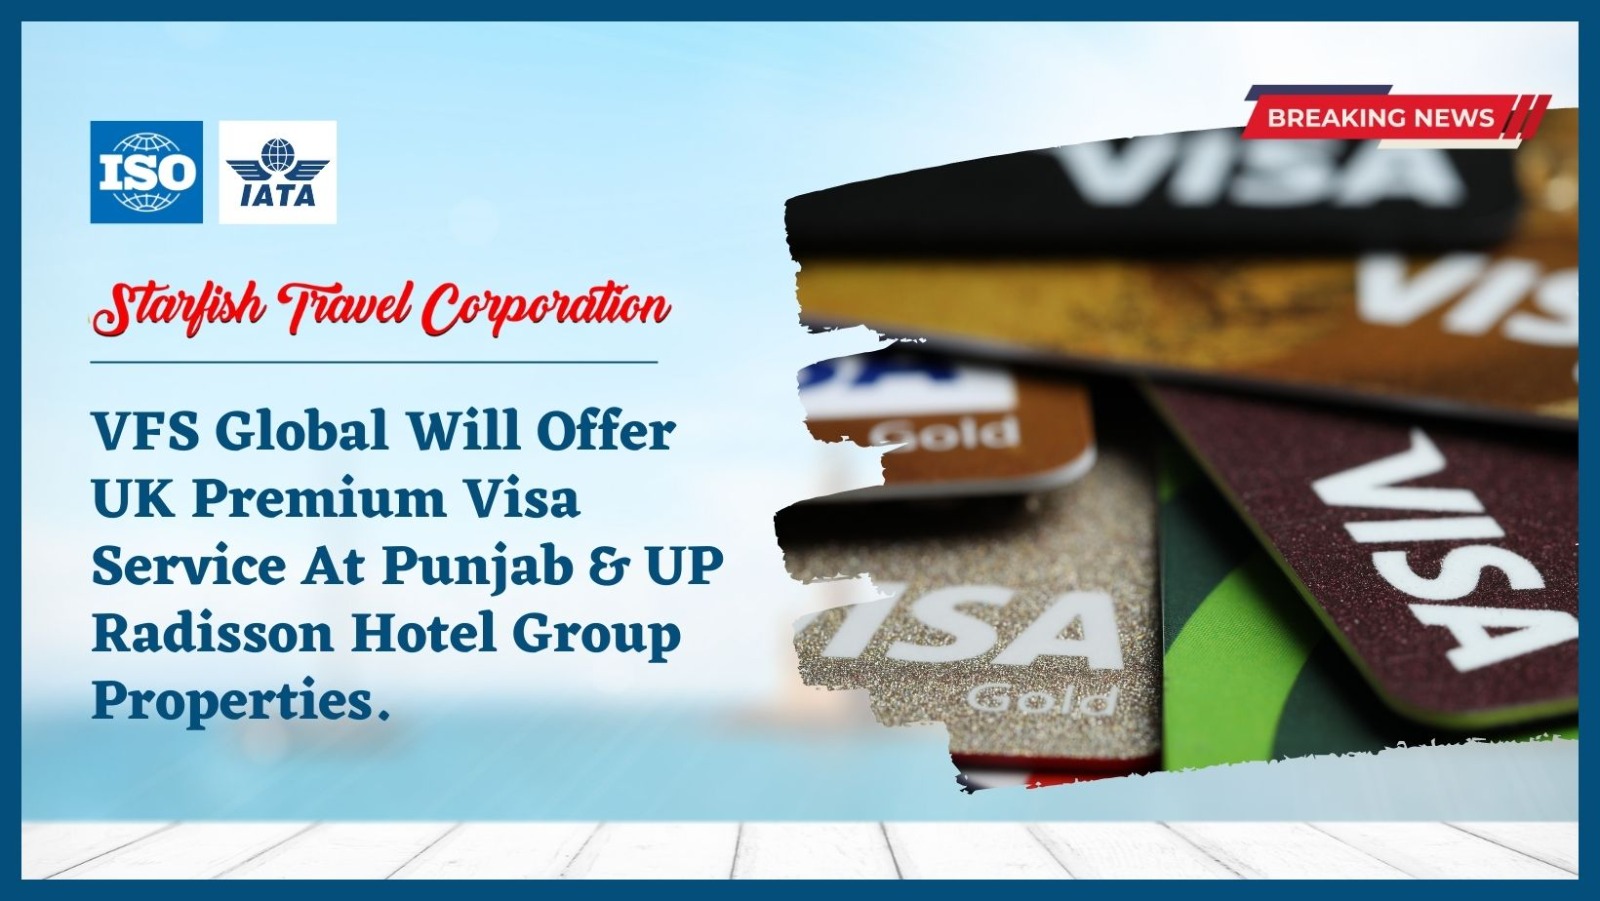 You are currently viewing VFS Global Will Offer UK Premium Visa Service At Punjab & UP Radisson Hotel Group Properties.